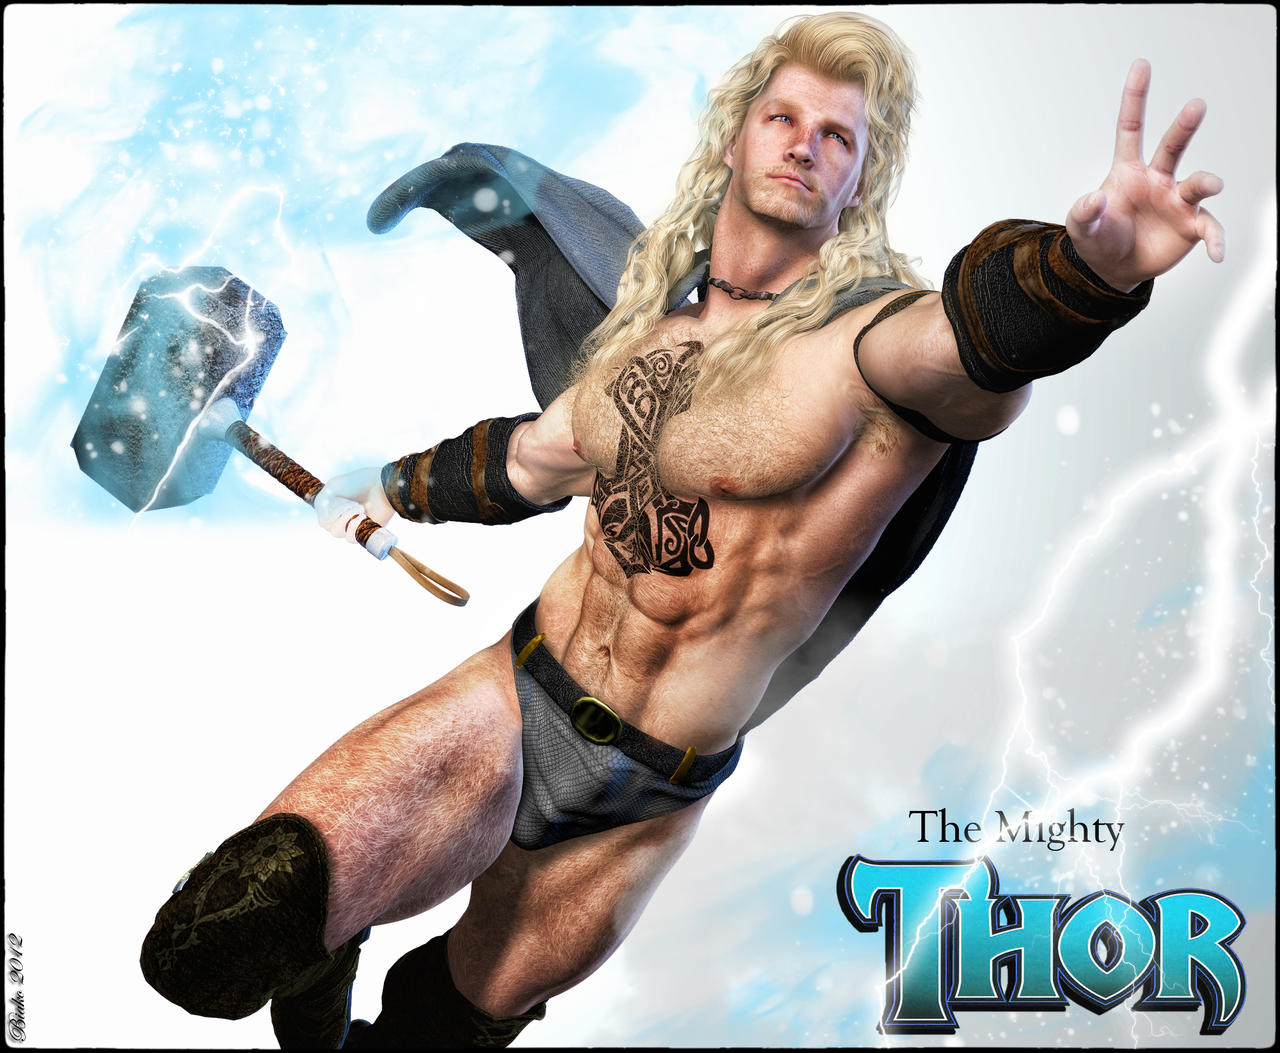 the_mighty_thor___fantasy_re_imagination_by_biako06-d57g60e.jpg